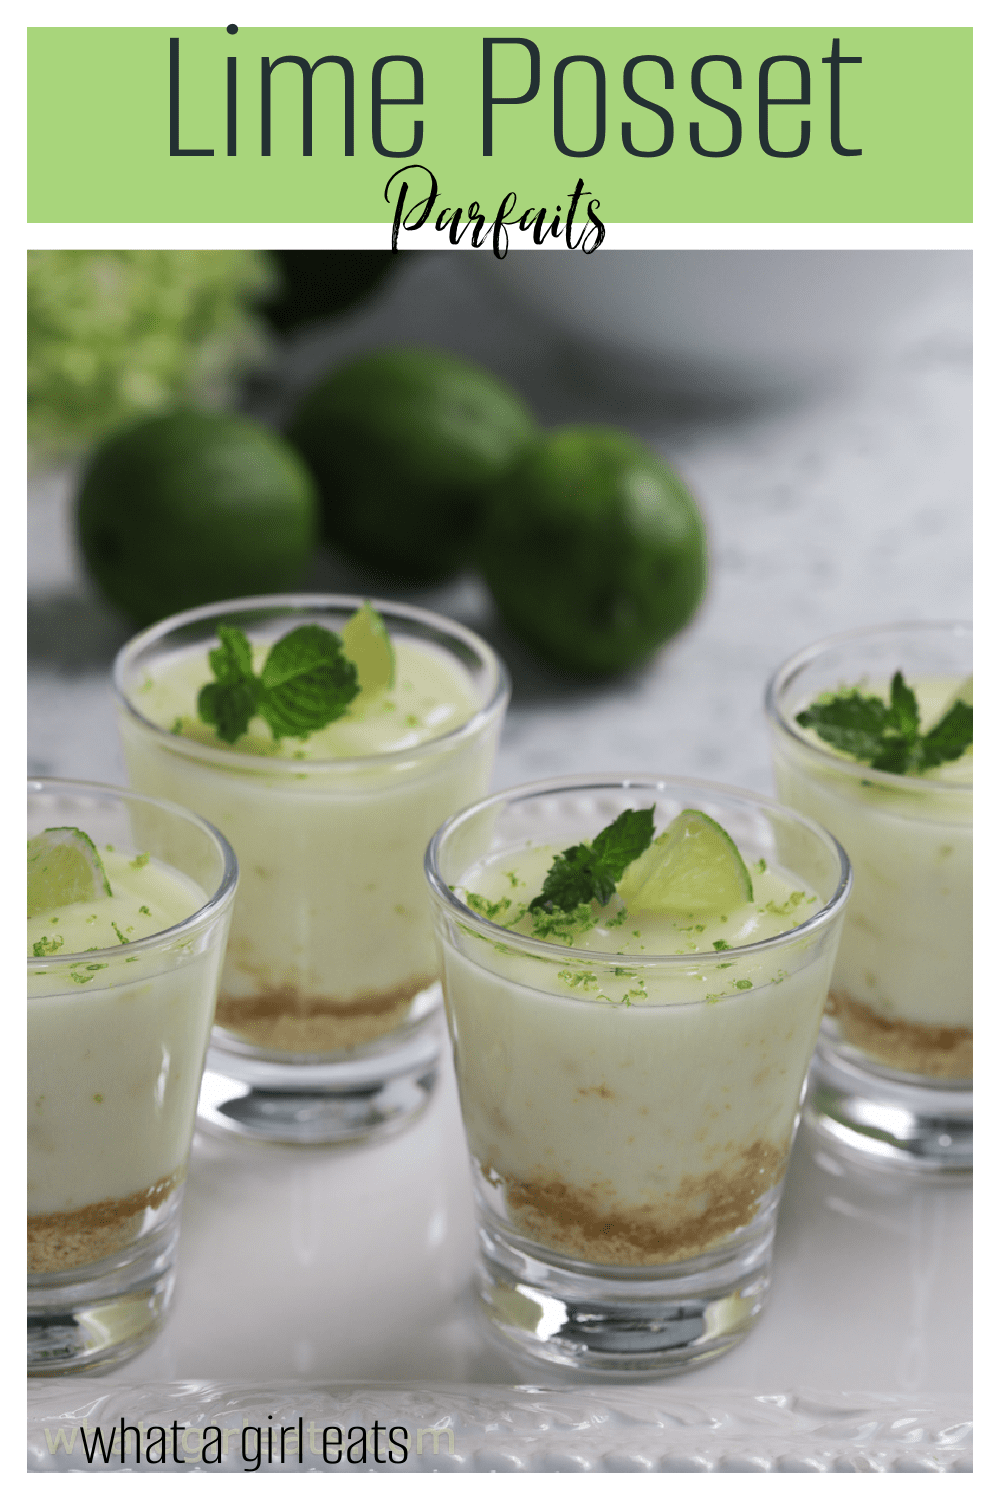 Lime posset is a twist on the English dessert. It's served with a layer of crushed graham cracker crumbs for a "lime pie" twist.